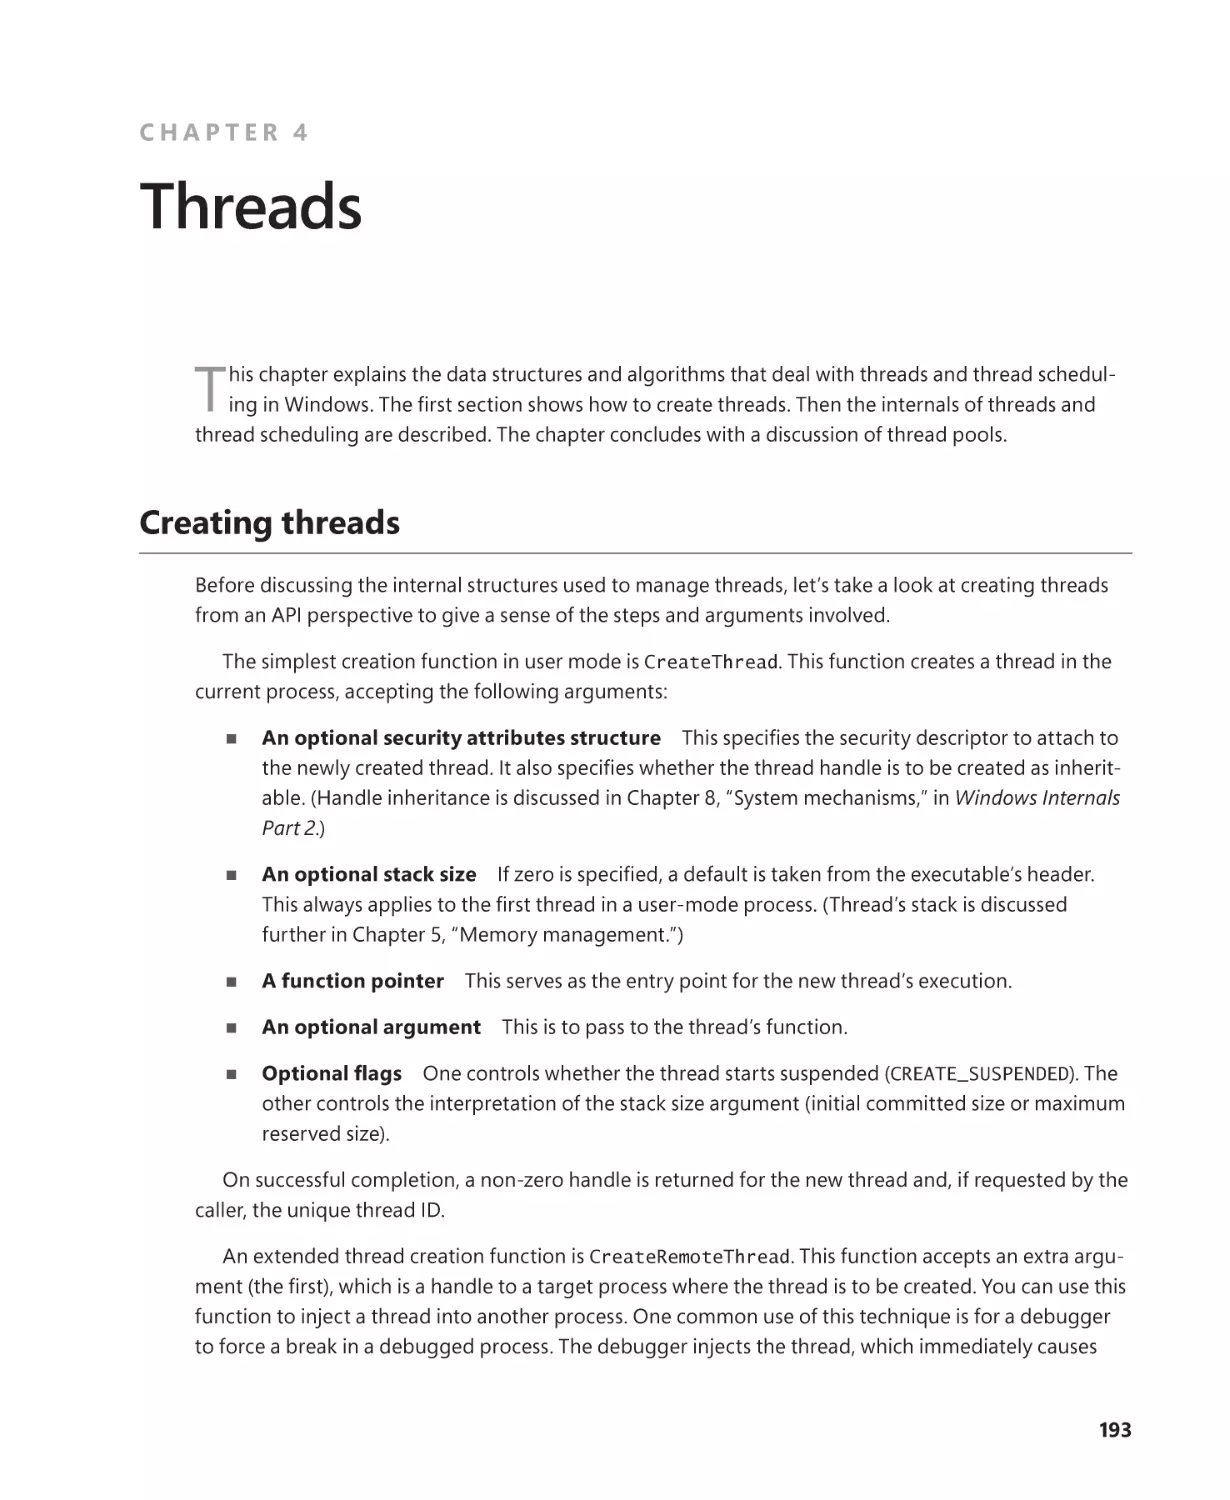 Chapter 4 Threads
Creating threads